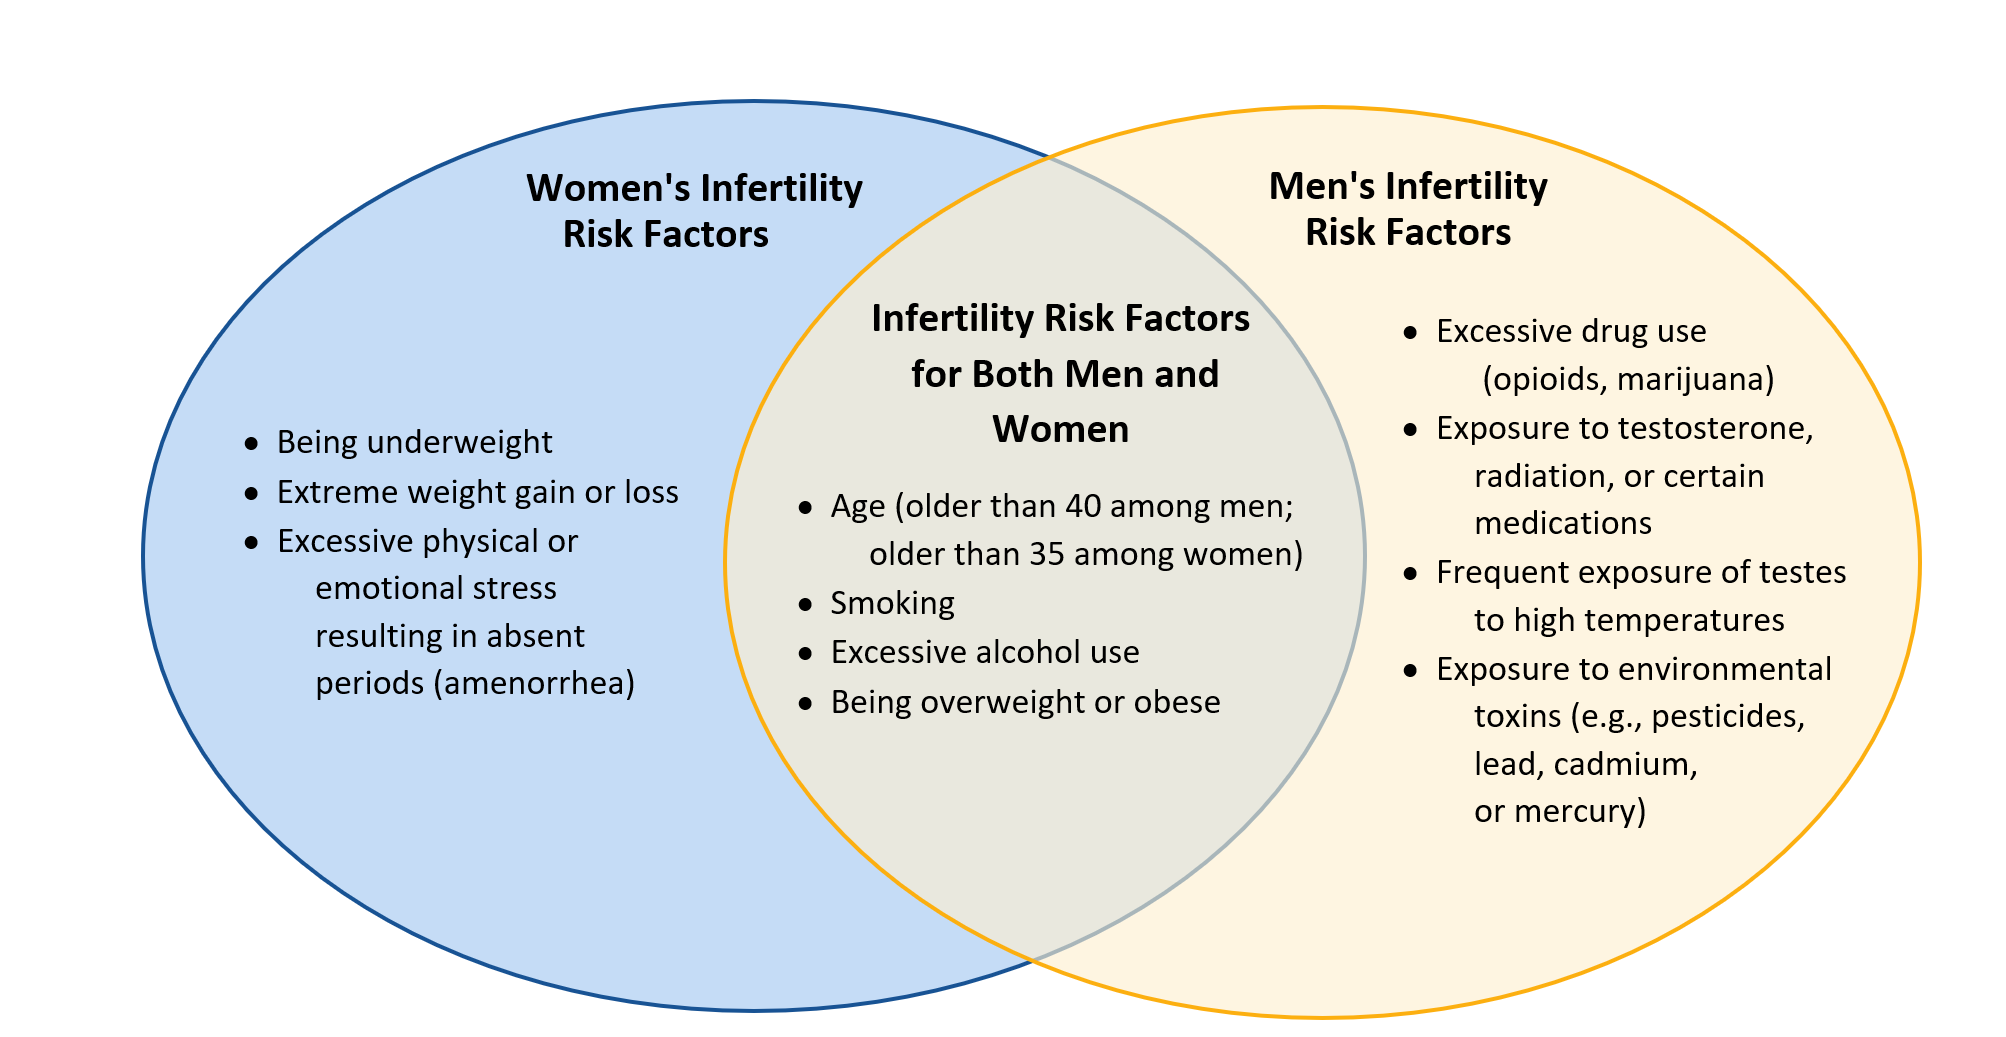 Figure 1:  This figure displays a Ven diagram of contributing risk factors for infertility for women and men.  Those risk factors that affect both women and men are listed where the two circles overlap and include age, smoking, excessive alcohol use, and being overweight or obese.  Risk factors that only apply to women include being underweight, extreme weight gain or loss, and excessive physical or emotional stress resulting in absent periods.  Risk factors that only apply to men include excessive drugs use, exposure to testosterone, radiation, or certain medications, frequent exposure of tests to high temperatures, and exposure to environmental toxins.